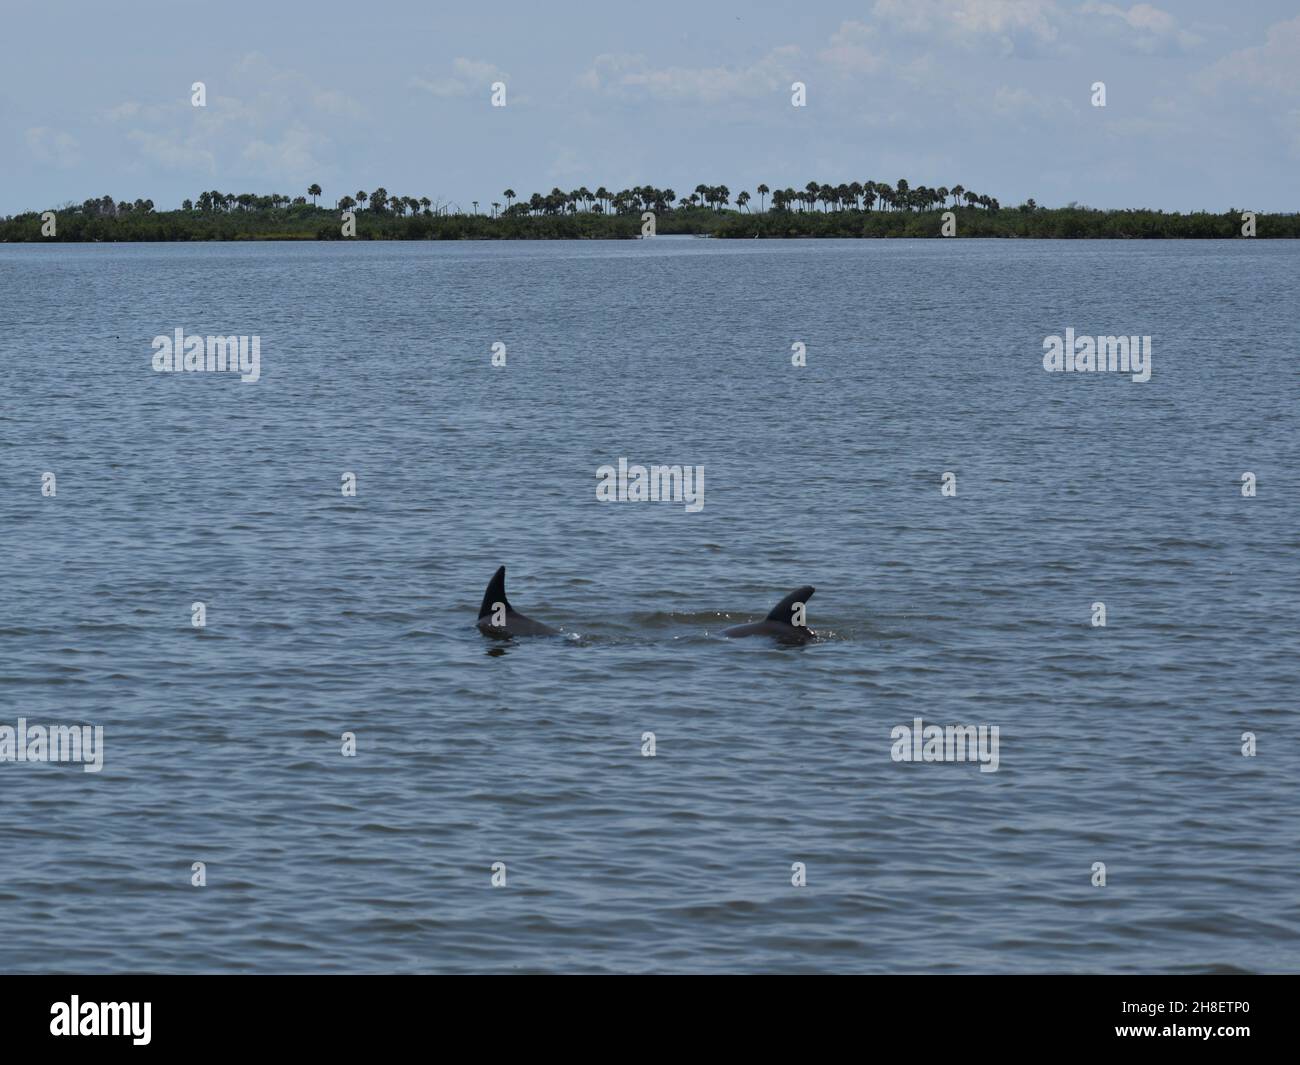 Two dolphins play in the river. Stock Photo